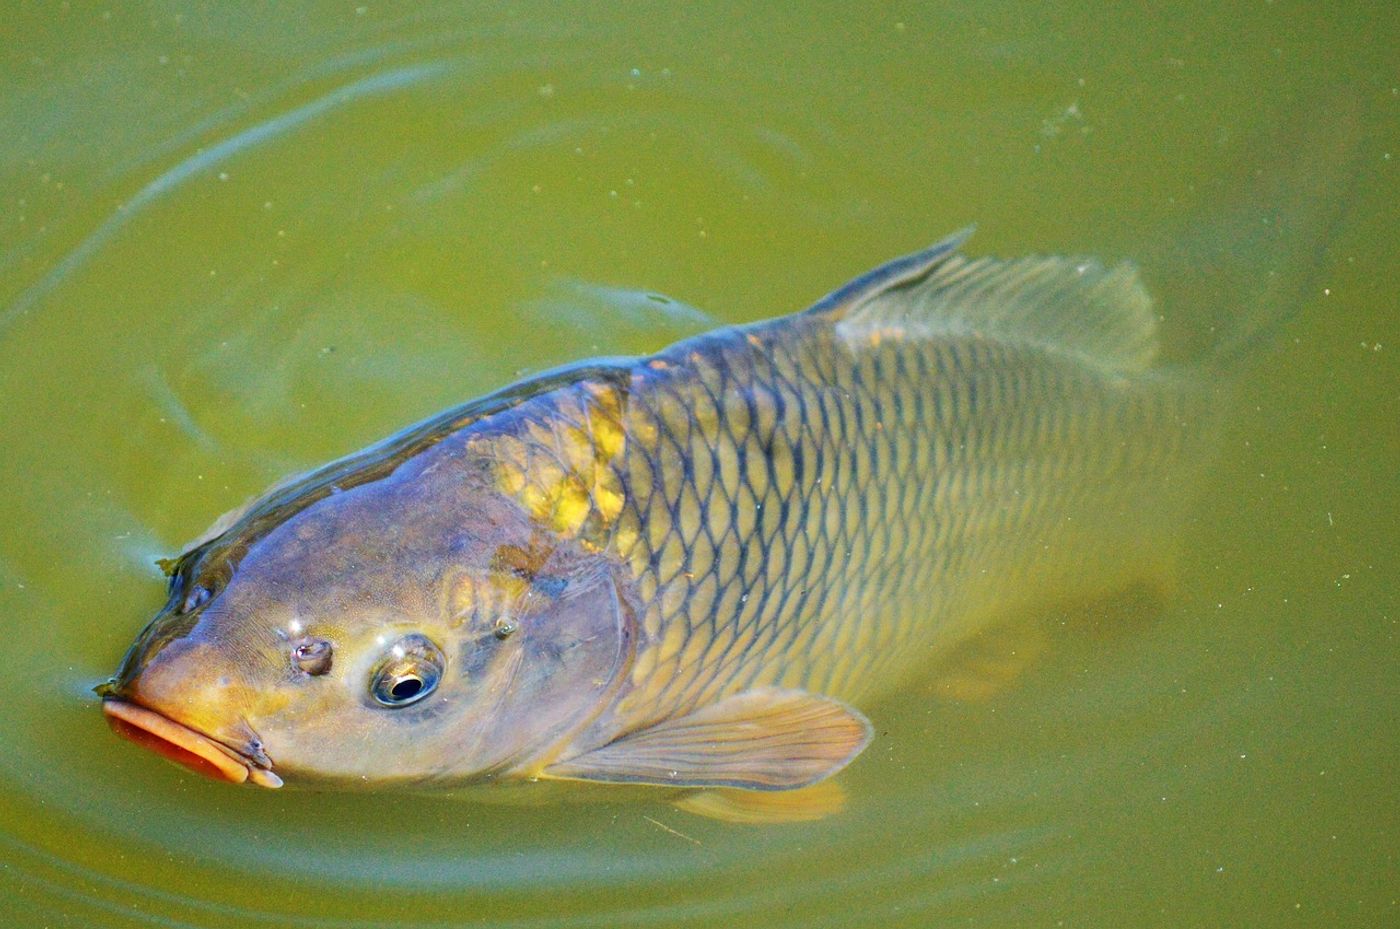 Alien carp are incredibly invasive, and they pose a threat to waterbirds and diving ducks every time they are introduced to a new ecosystem.